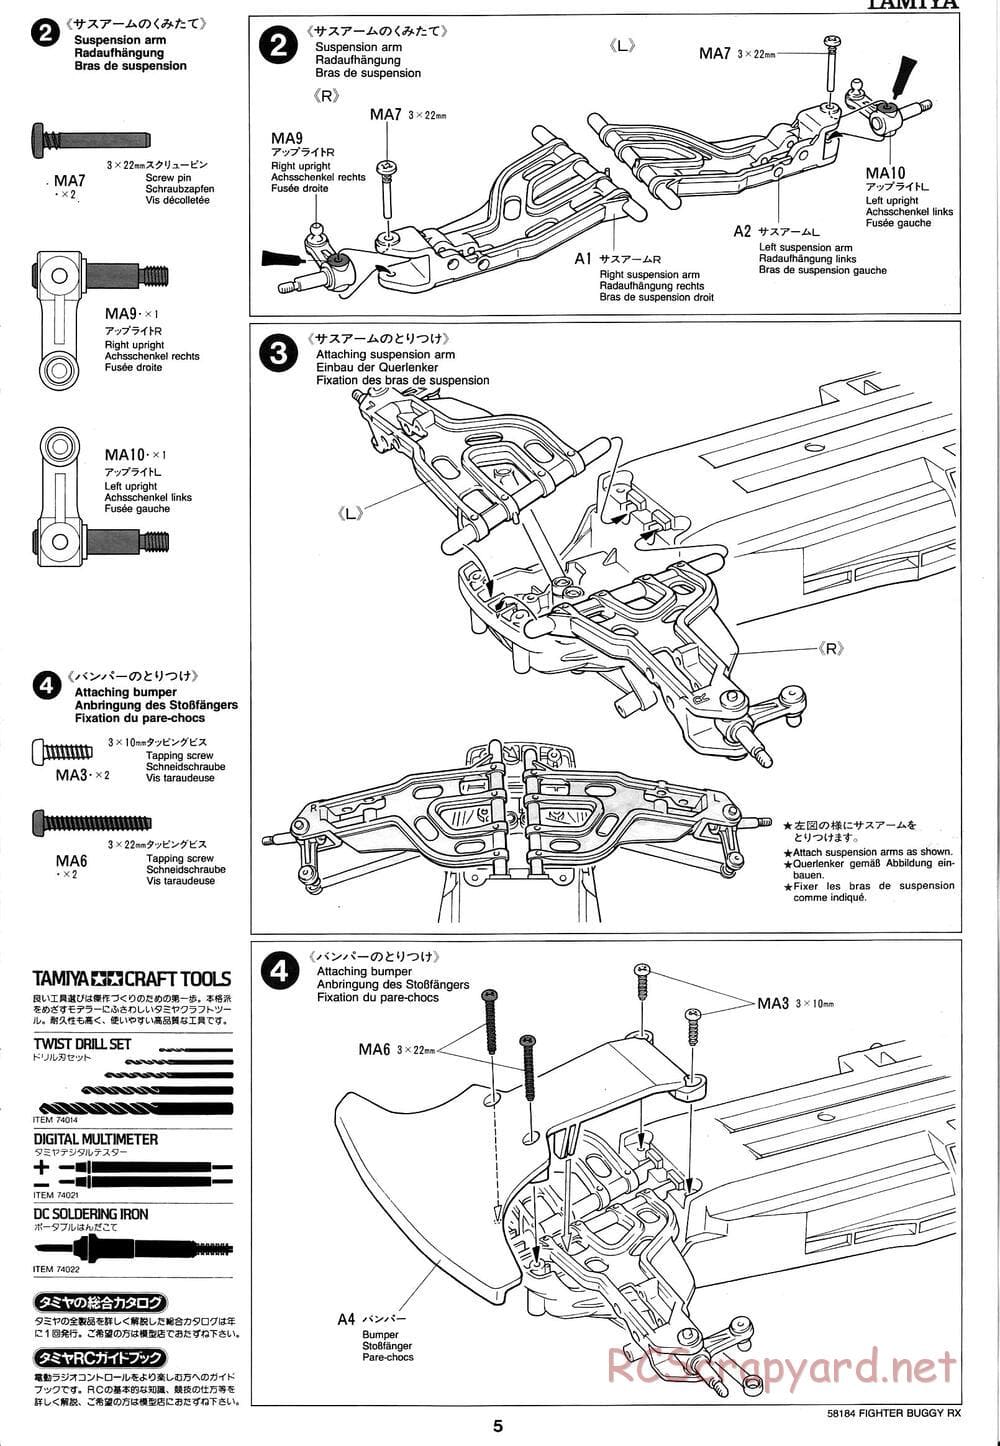 Tamiya - Fighter Buggy RX Chassis - Manual - Page 5